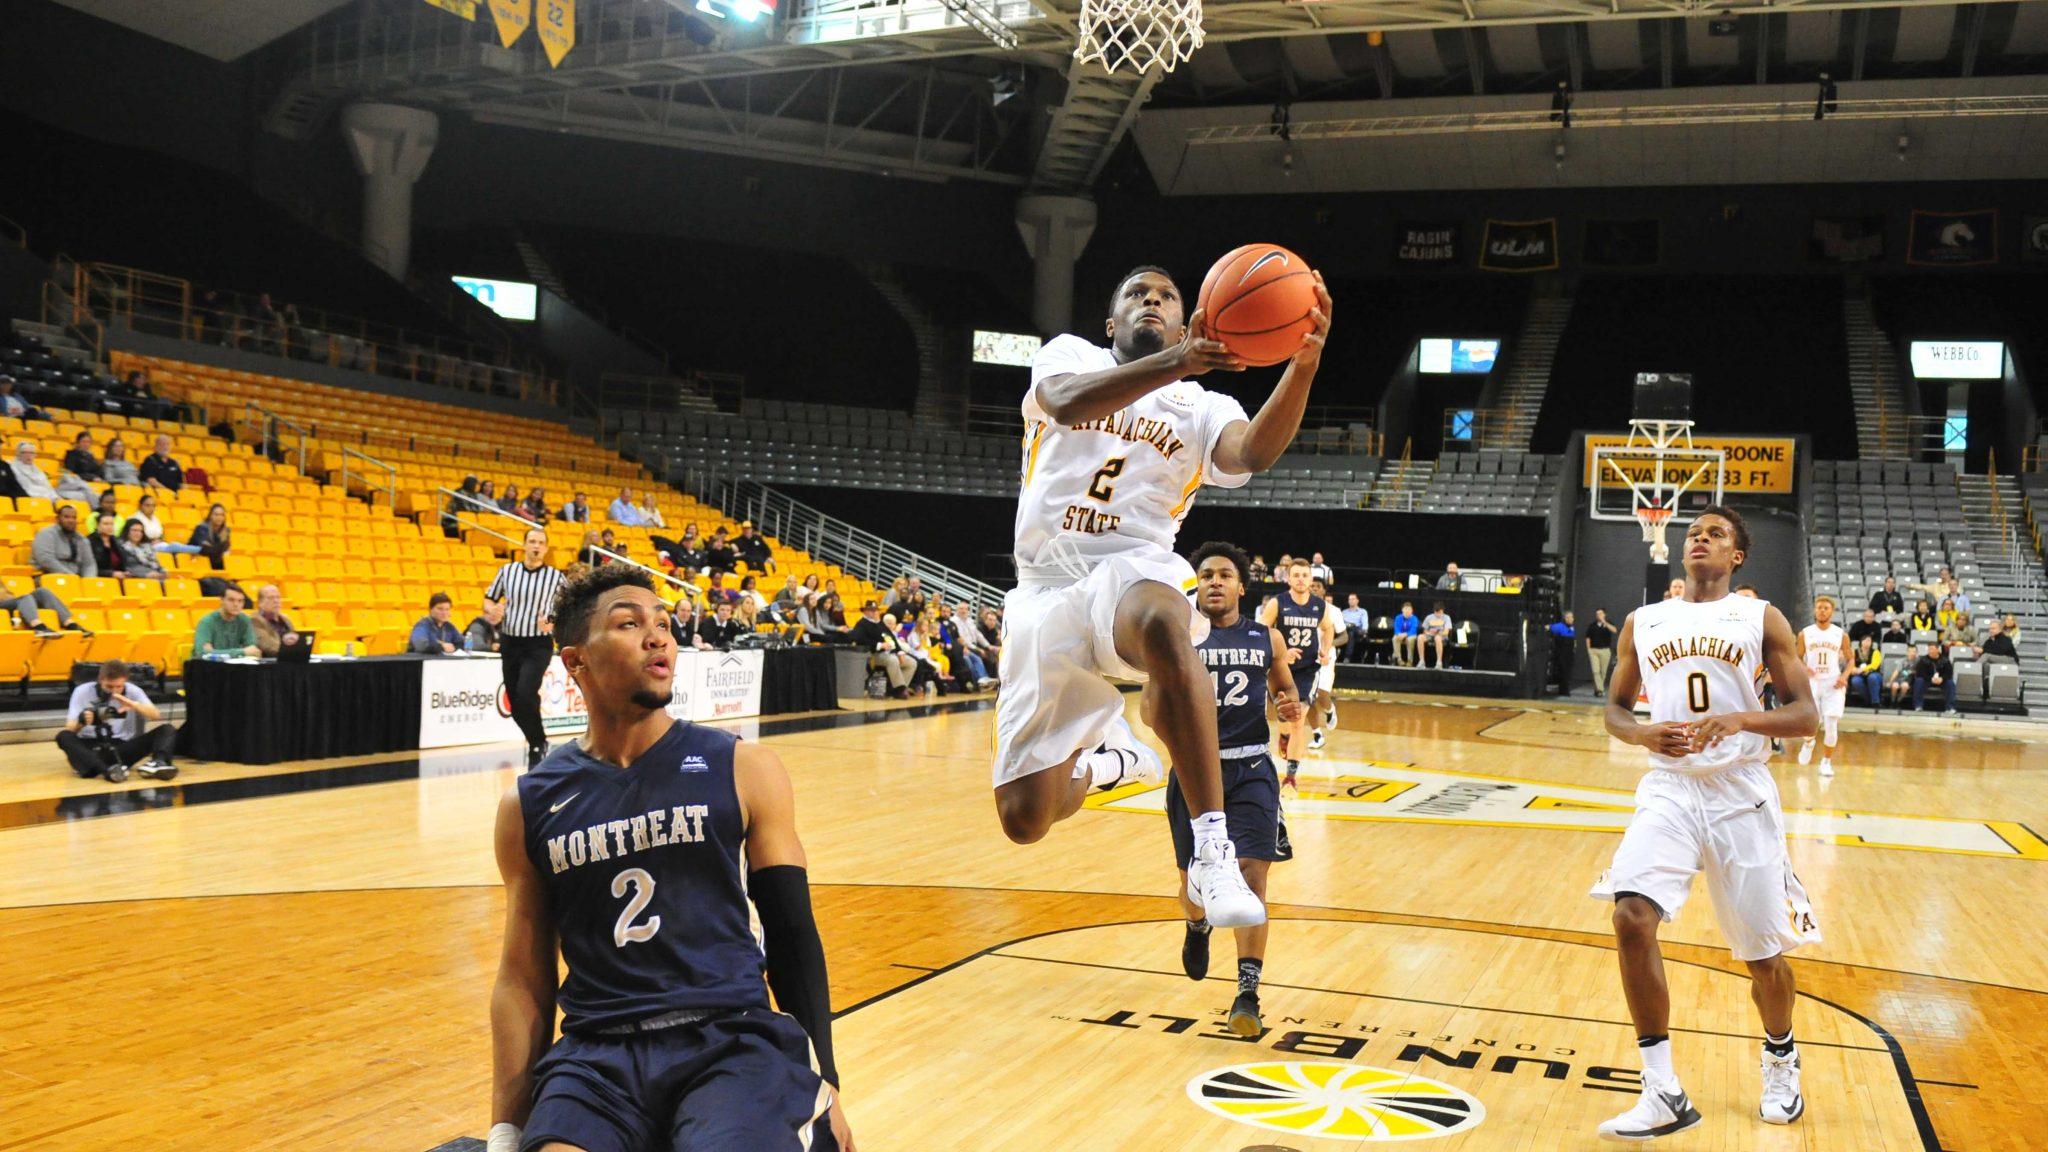 The+Mountaineers+dished+out+a+season+high+30+assists+en+route+to+their+blowout+win+over+Montreat%0APhoto+courtesy%3A+App+State+Athletics